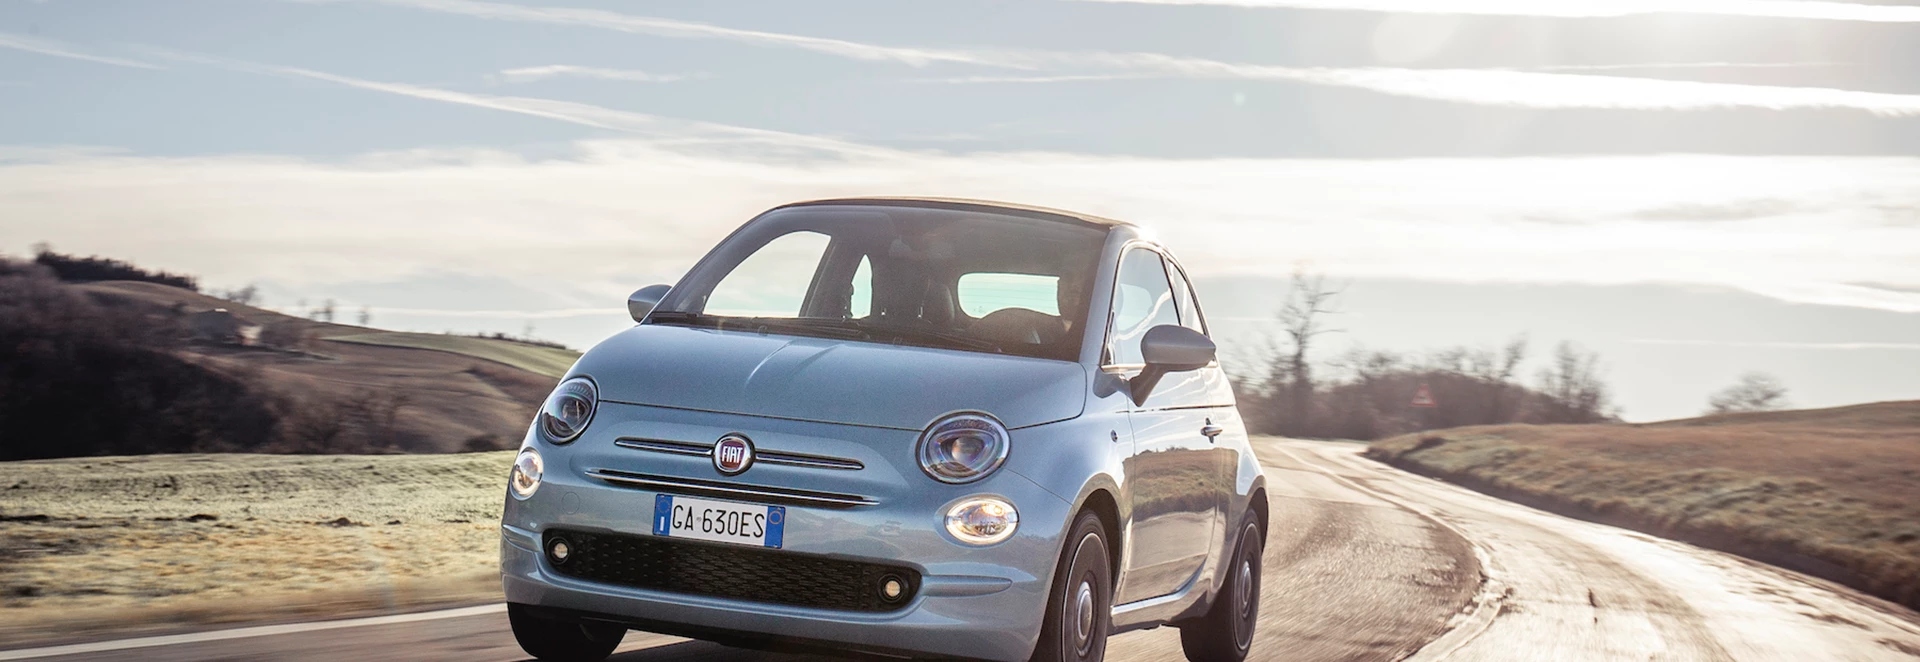 5 key features on the new Fiat 500 Hybrid